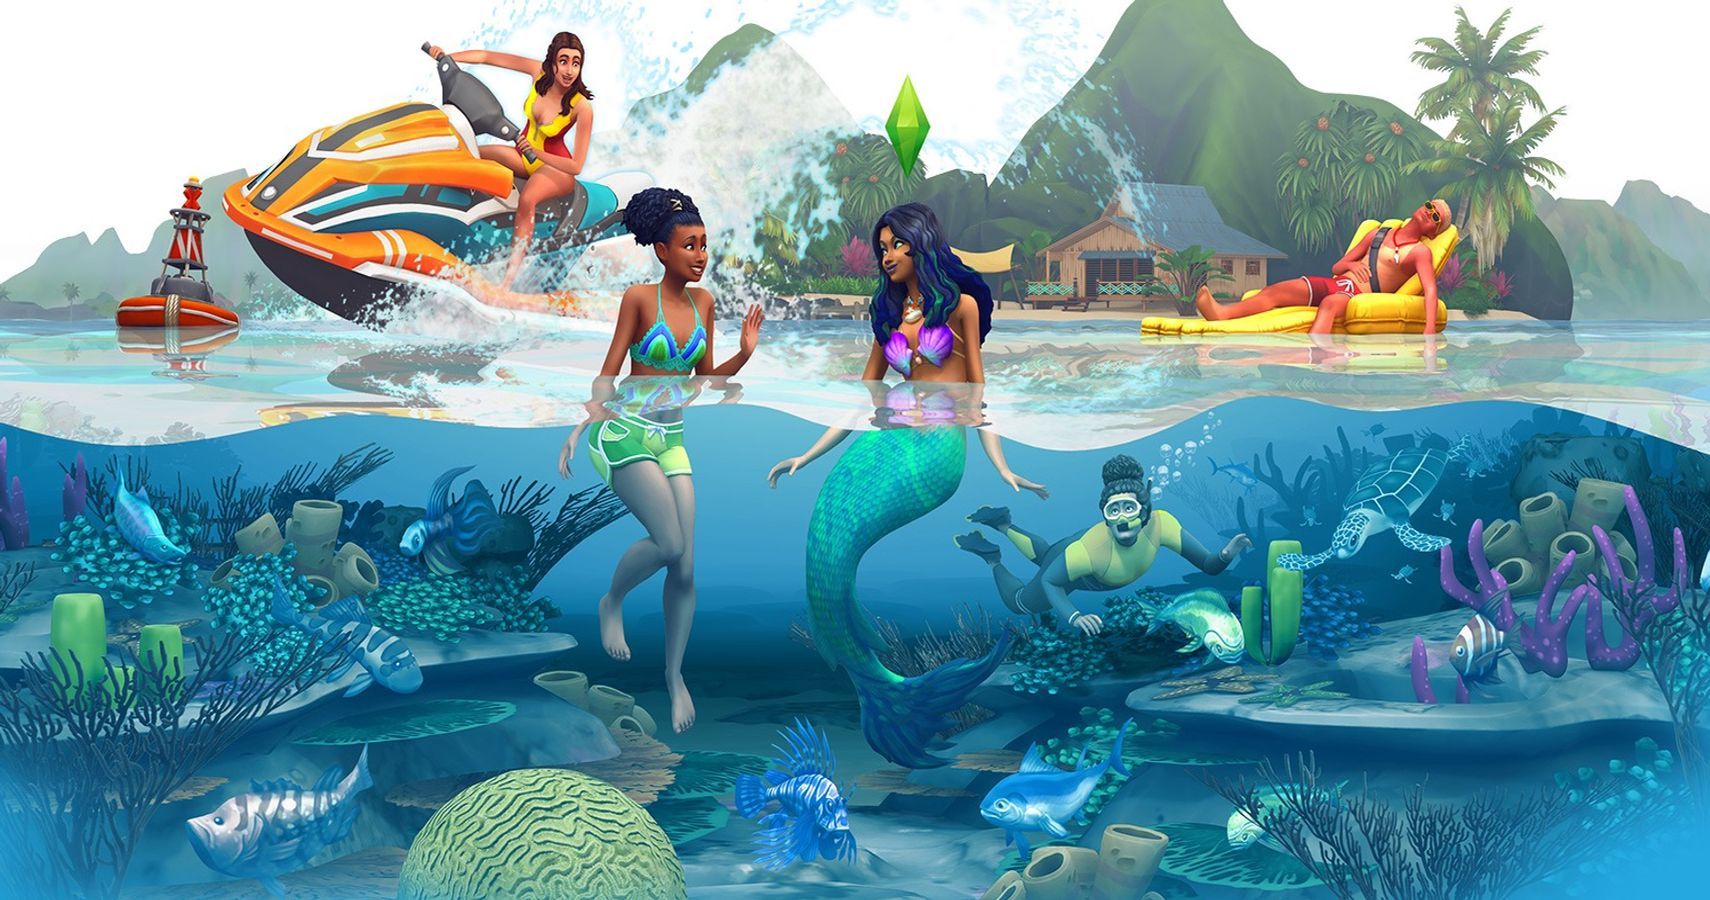 The Sims Head To The Islands In Its Next Expansion Pack